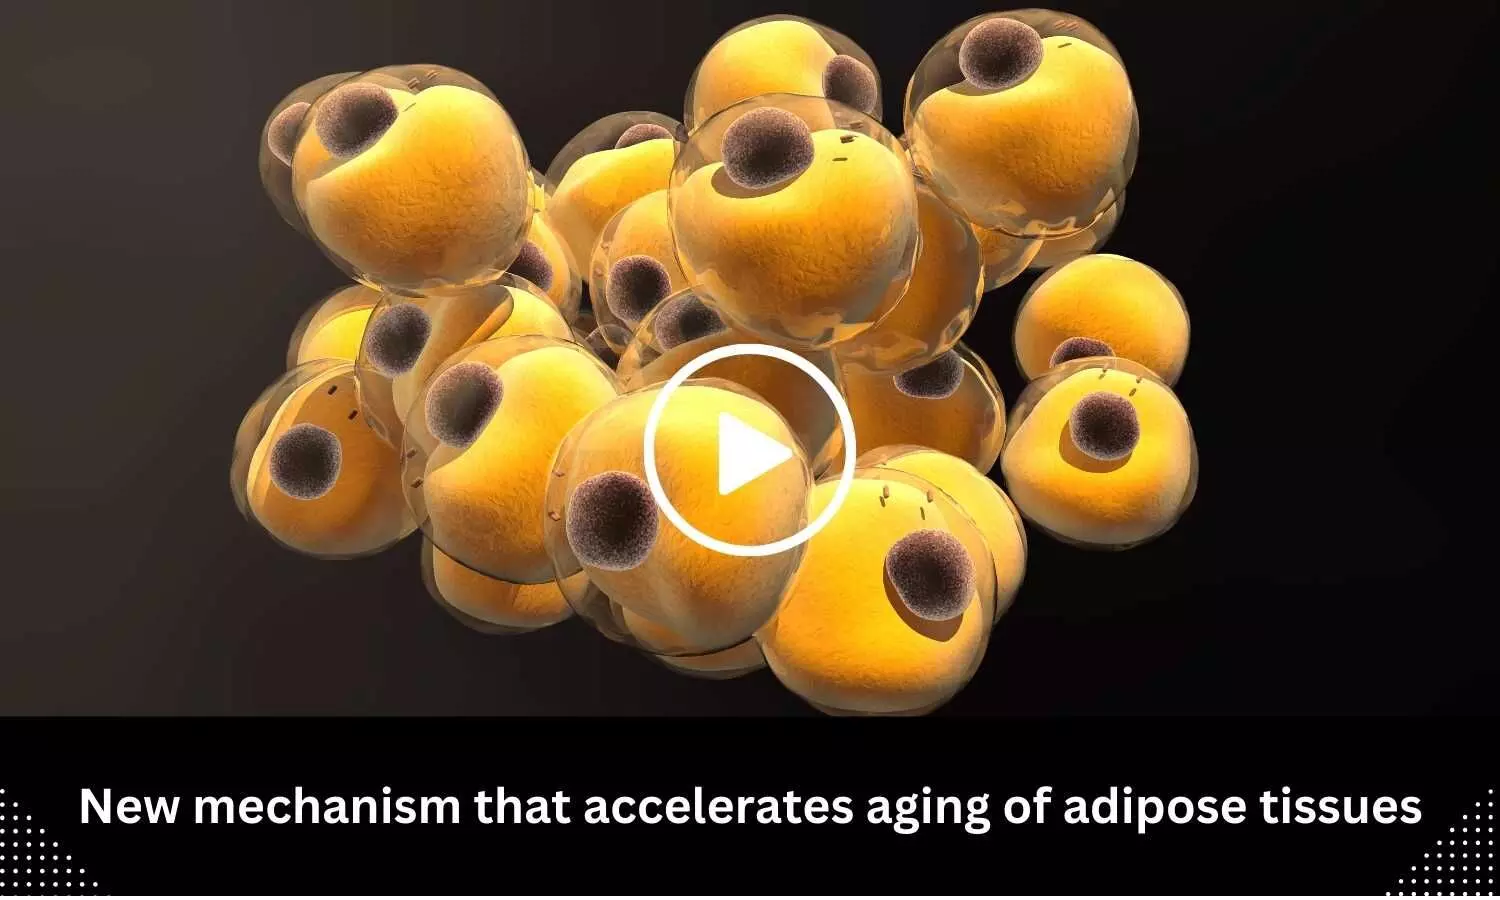 New mechanism that accelerates aging of adipose tissues